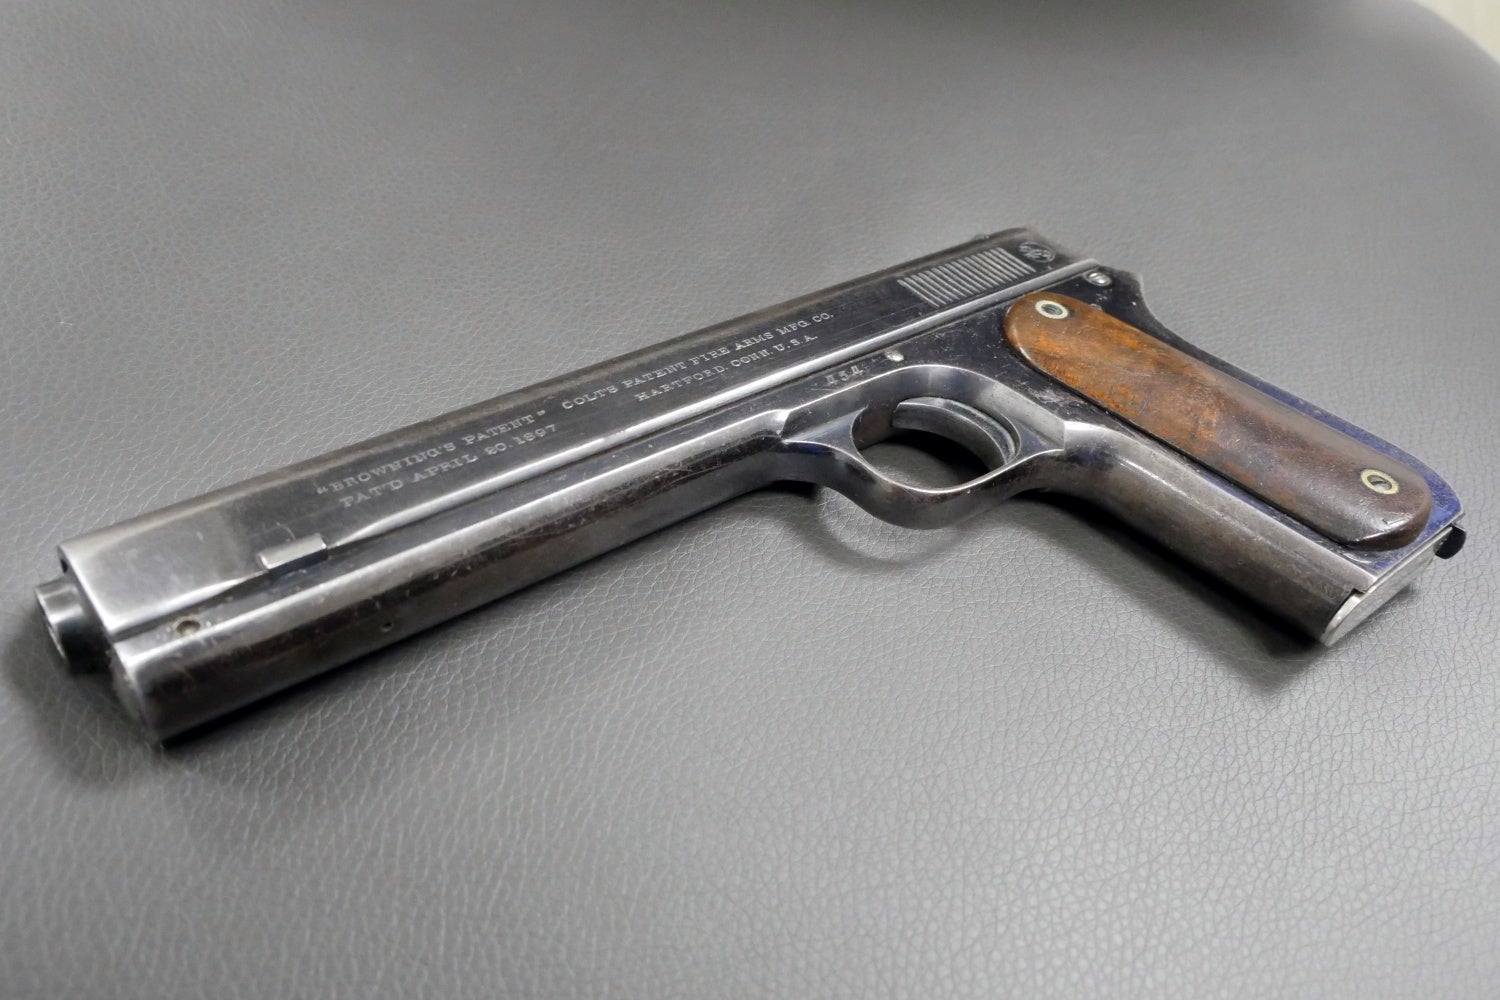 POTD: Colt 1900 With A Three Digit Serial Number.